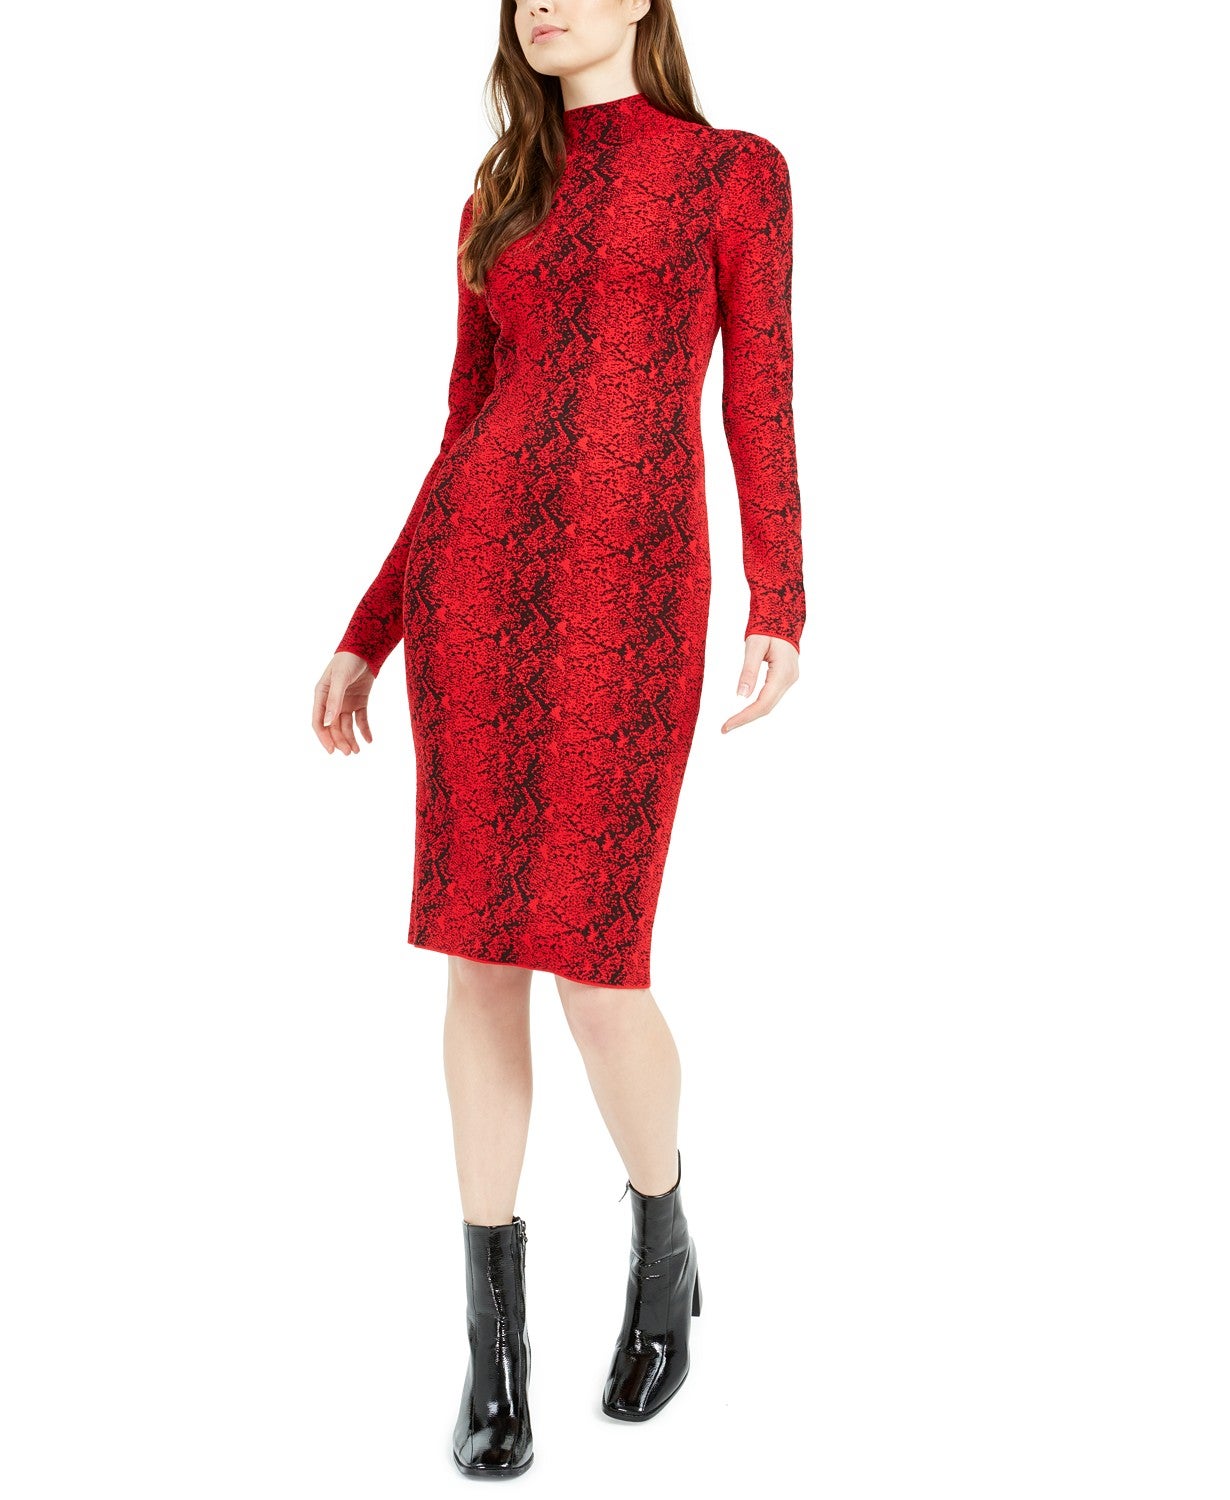 Keep It Cute & Warm With These Chic Sweater Dresses | Essence